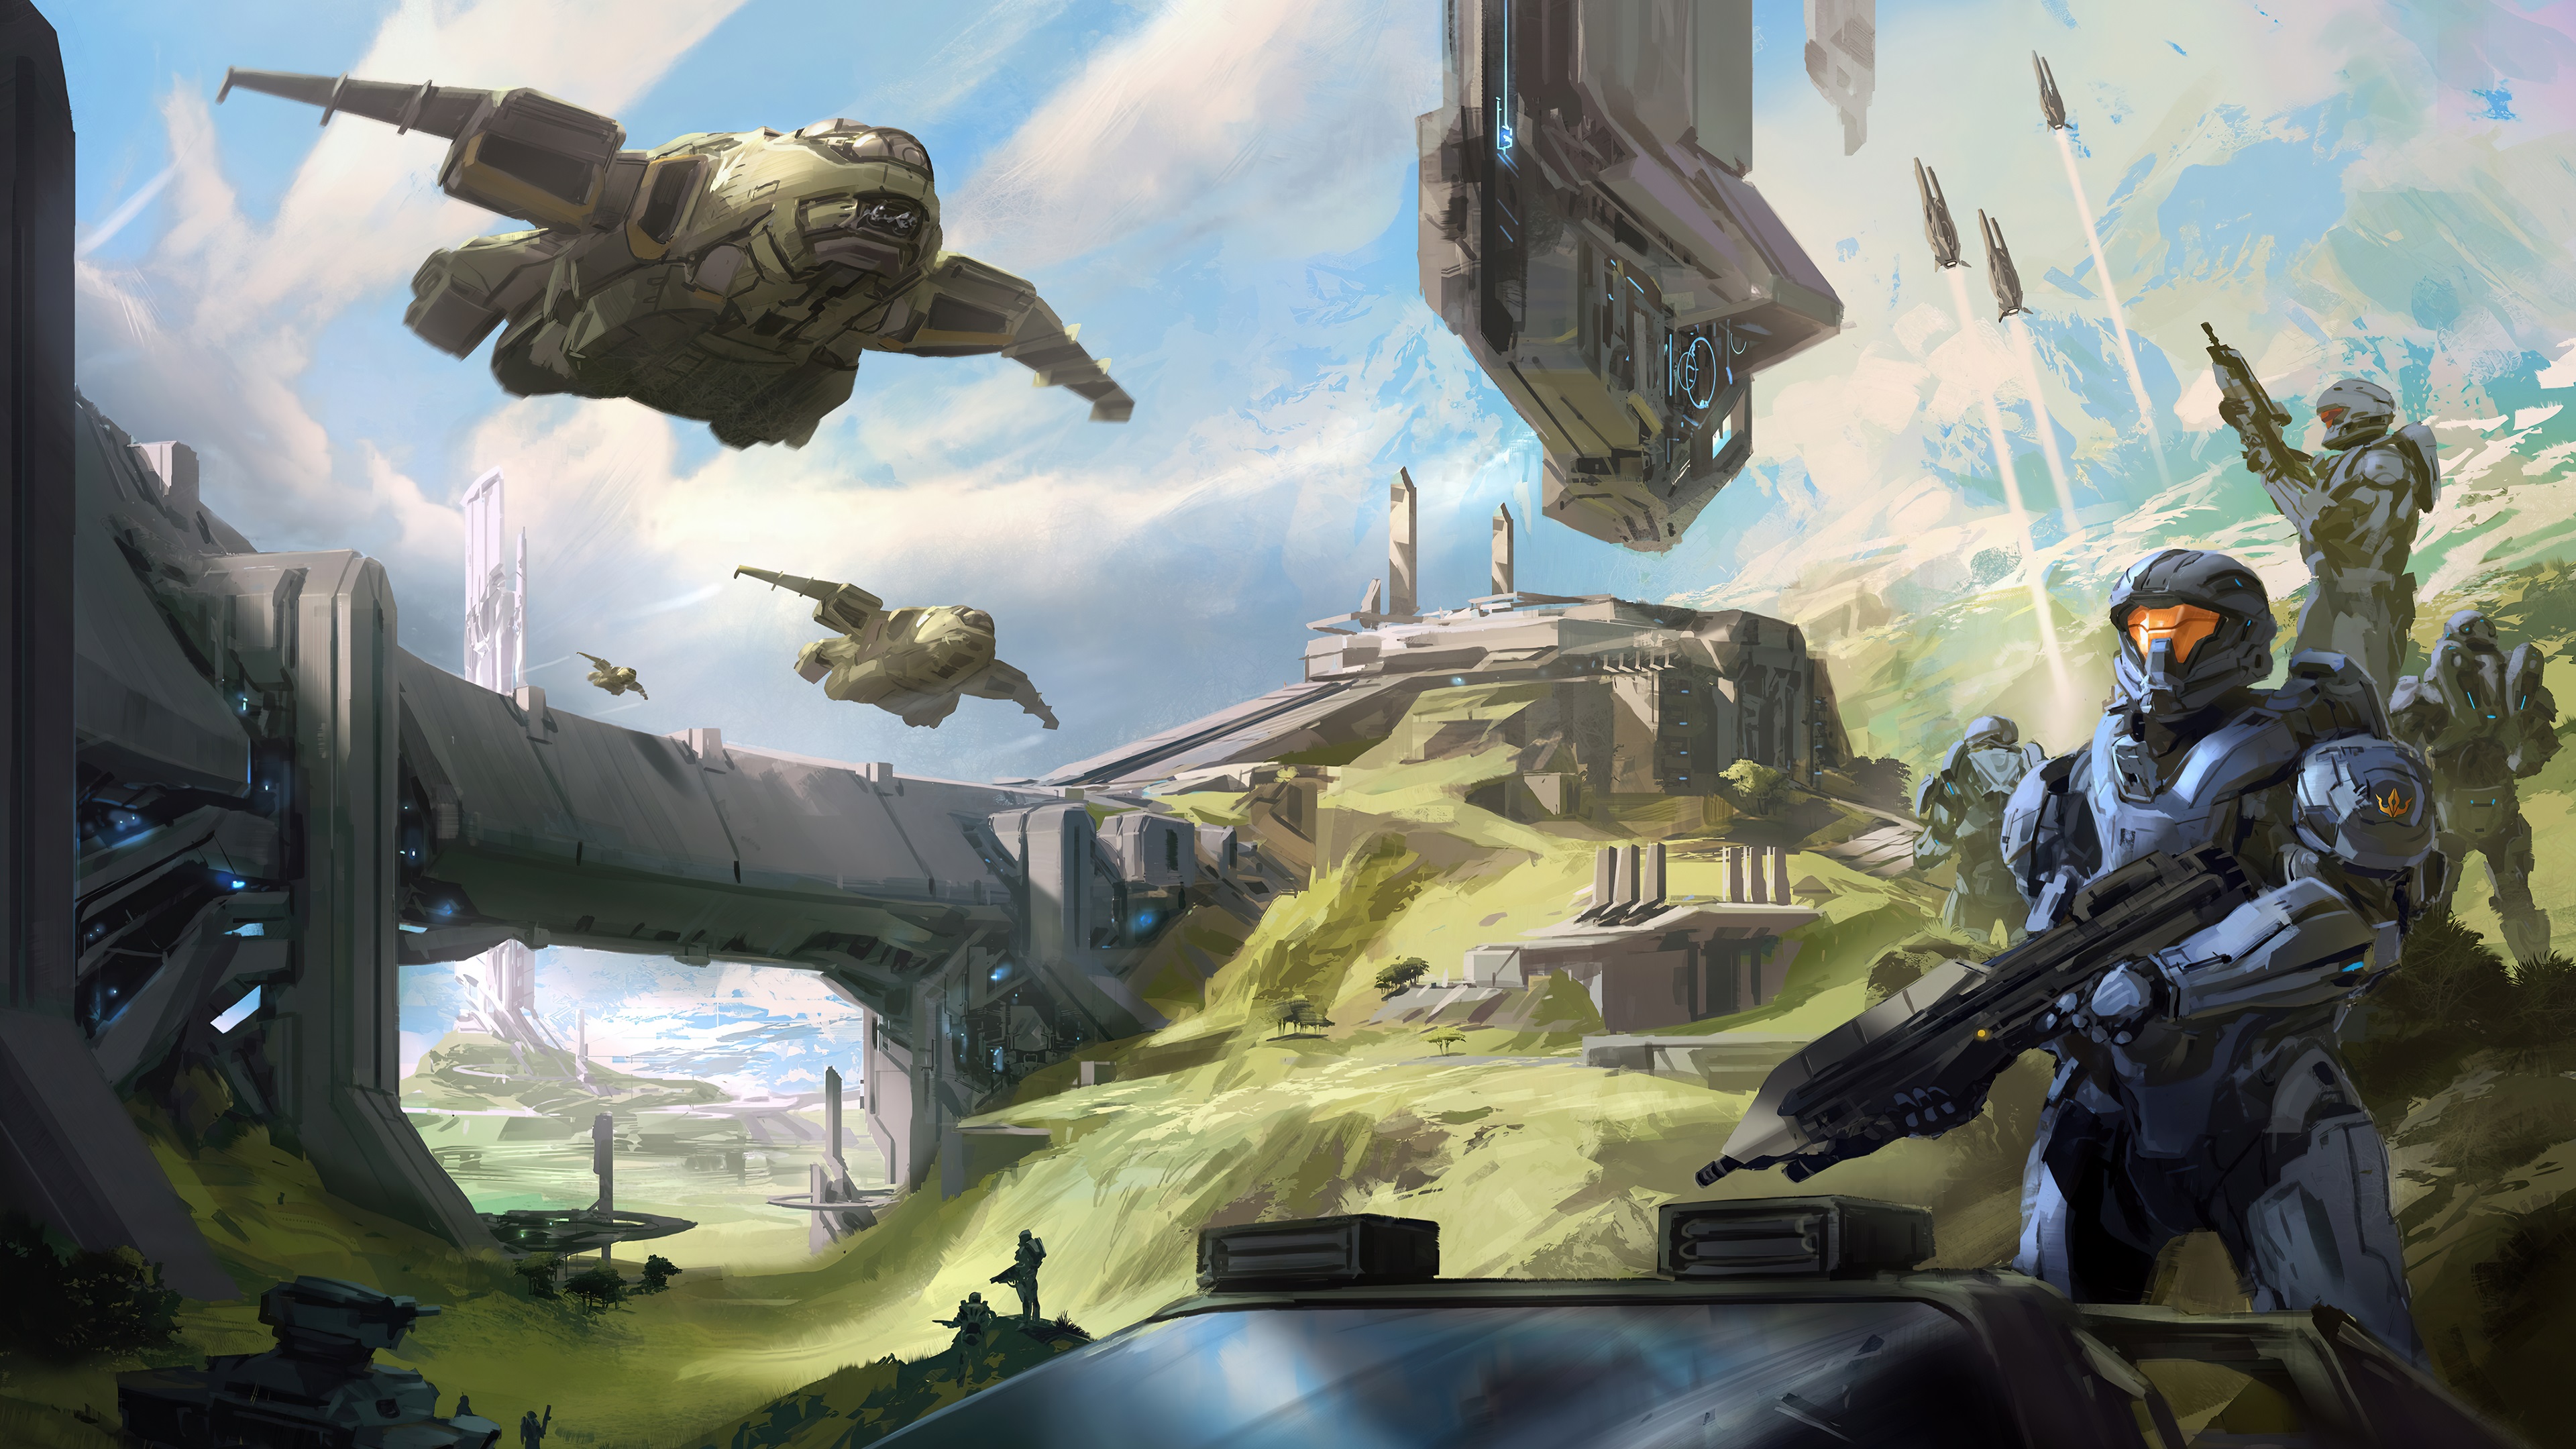 Halo Video Games Artwork Science Fiction 3840x2160